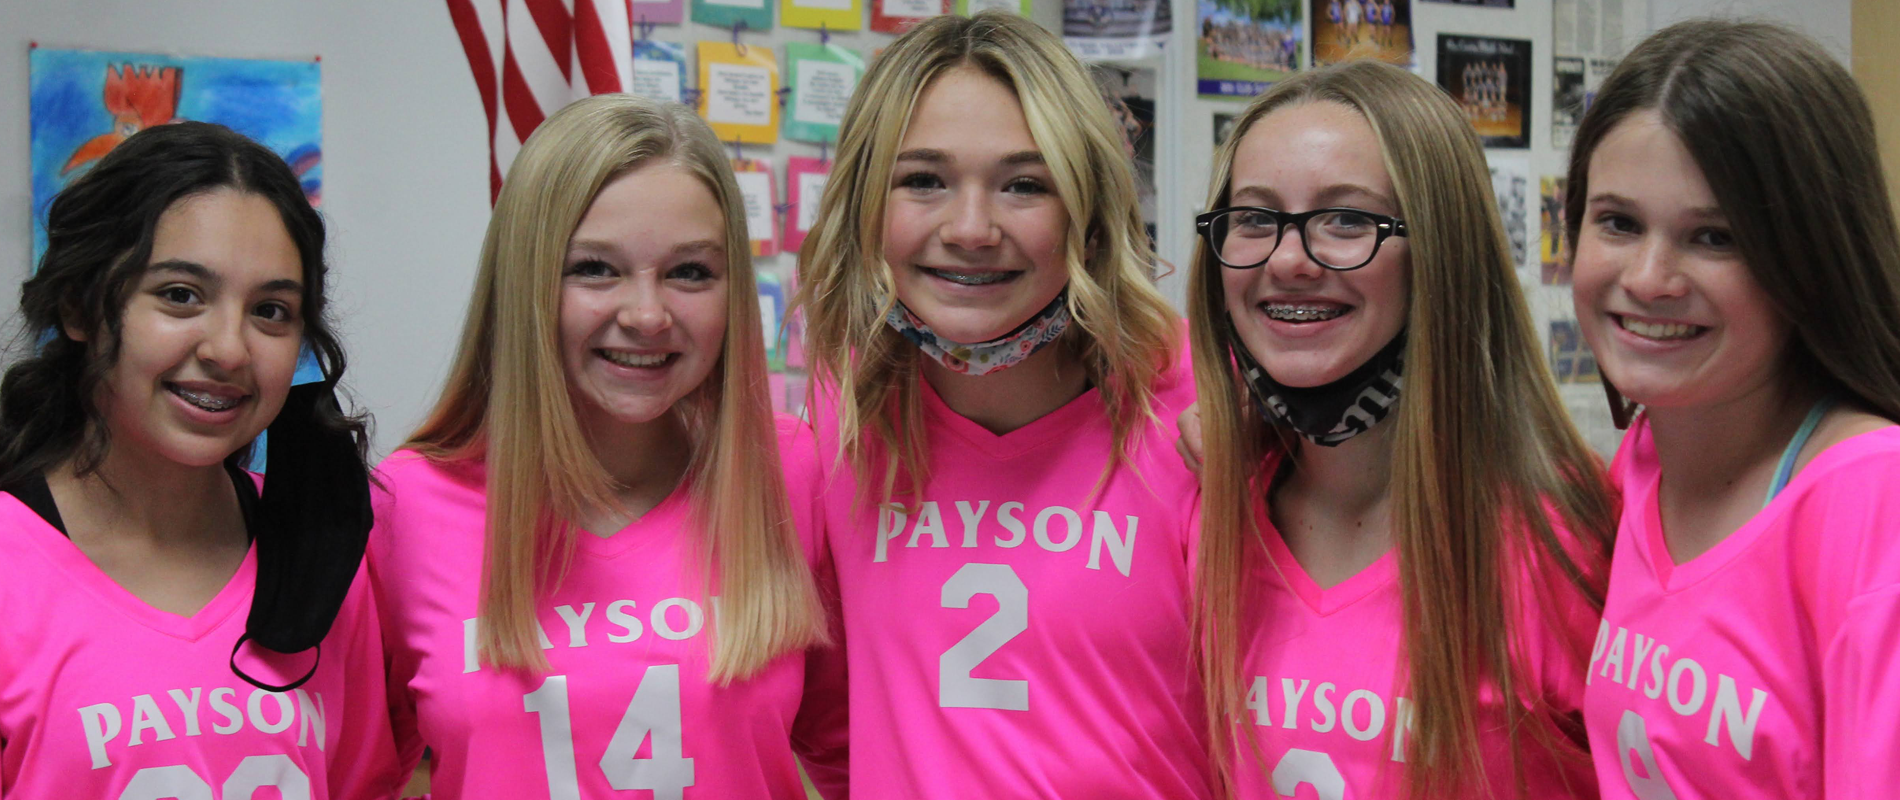 5 female students in matching pink shirts